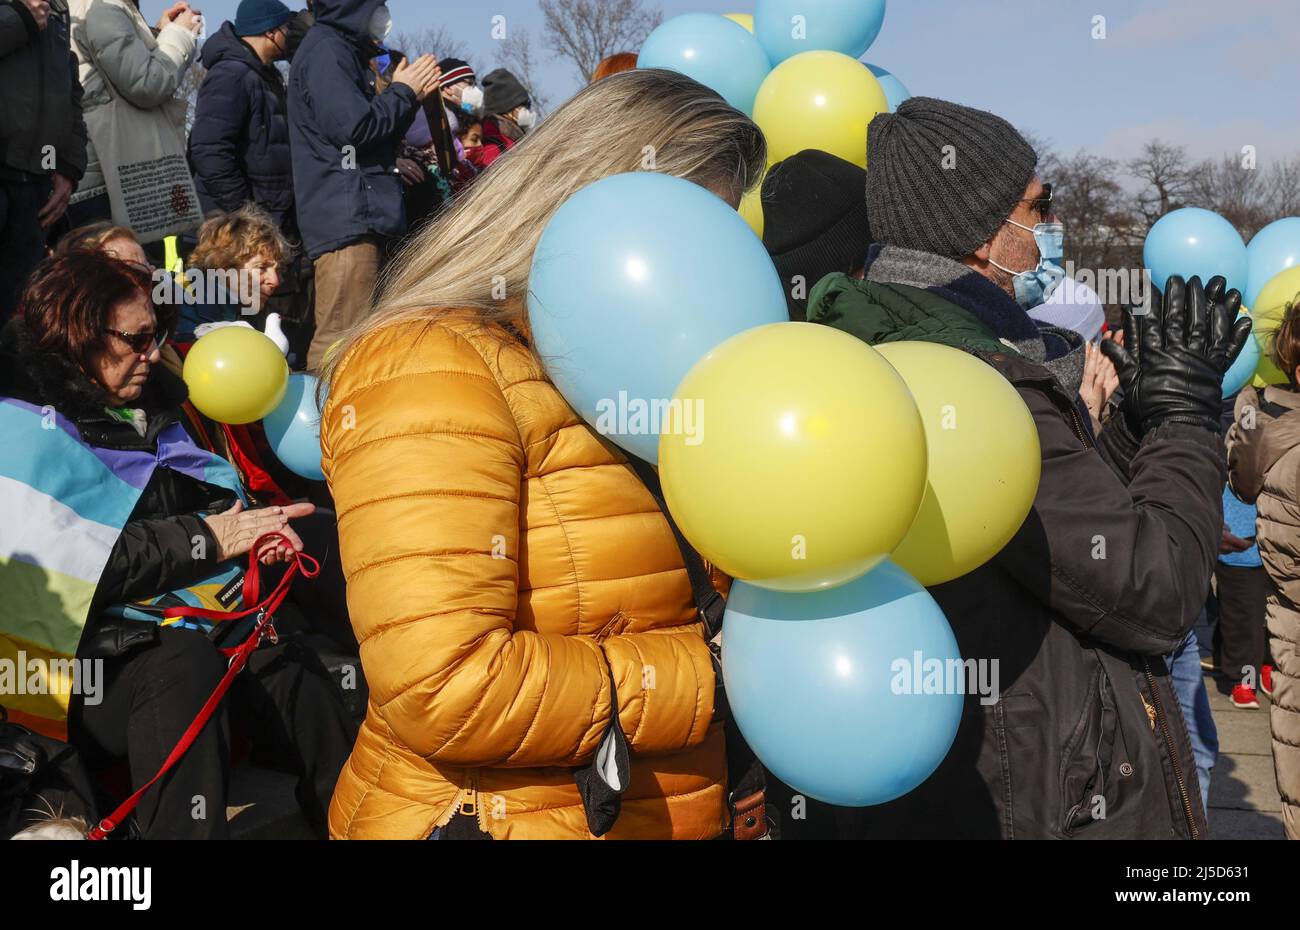 Berlin, 27.02.2022 - A demonstration holds balloons in with the colors of the Ukrainian flag. Thousands demonstrate in Berlin against the war of Russian troops in Ukraine. [automated translation] Stock Photo